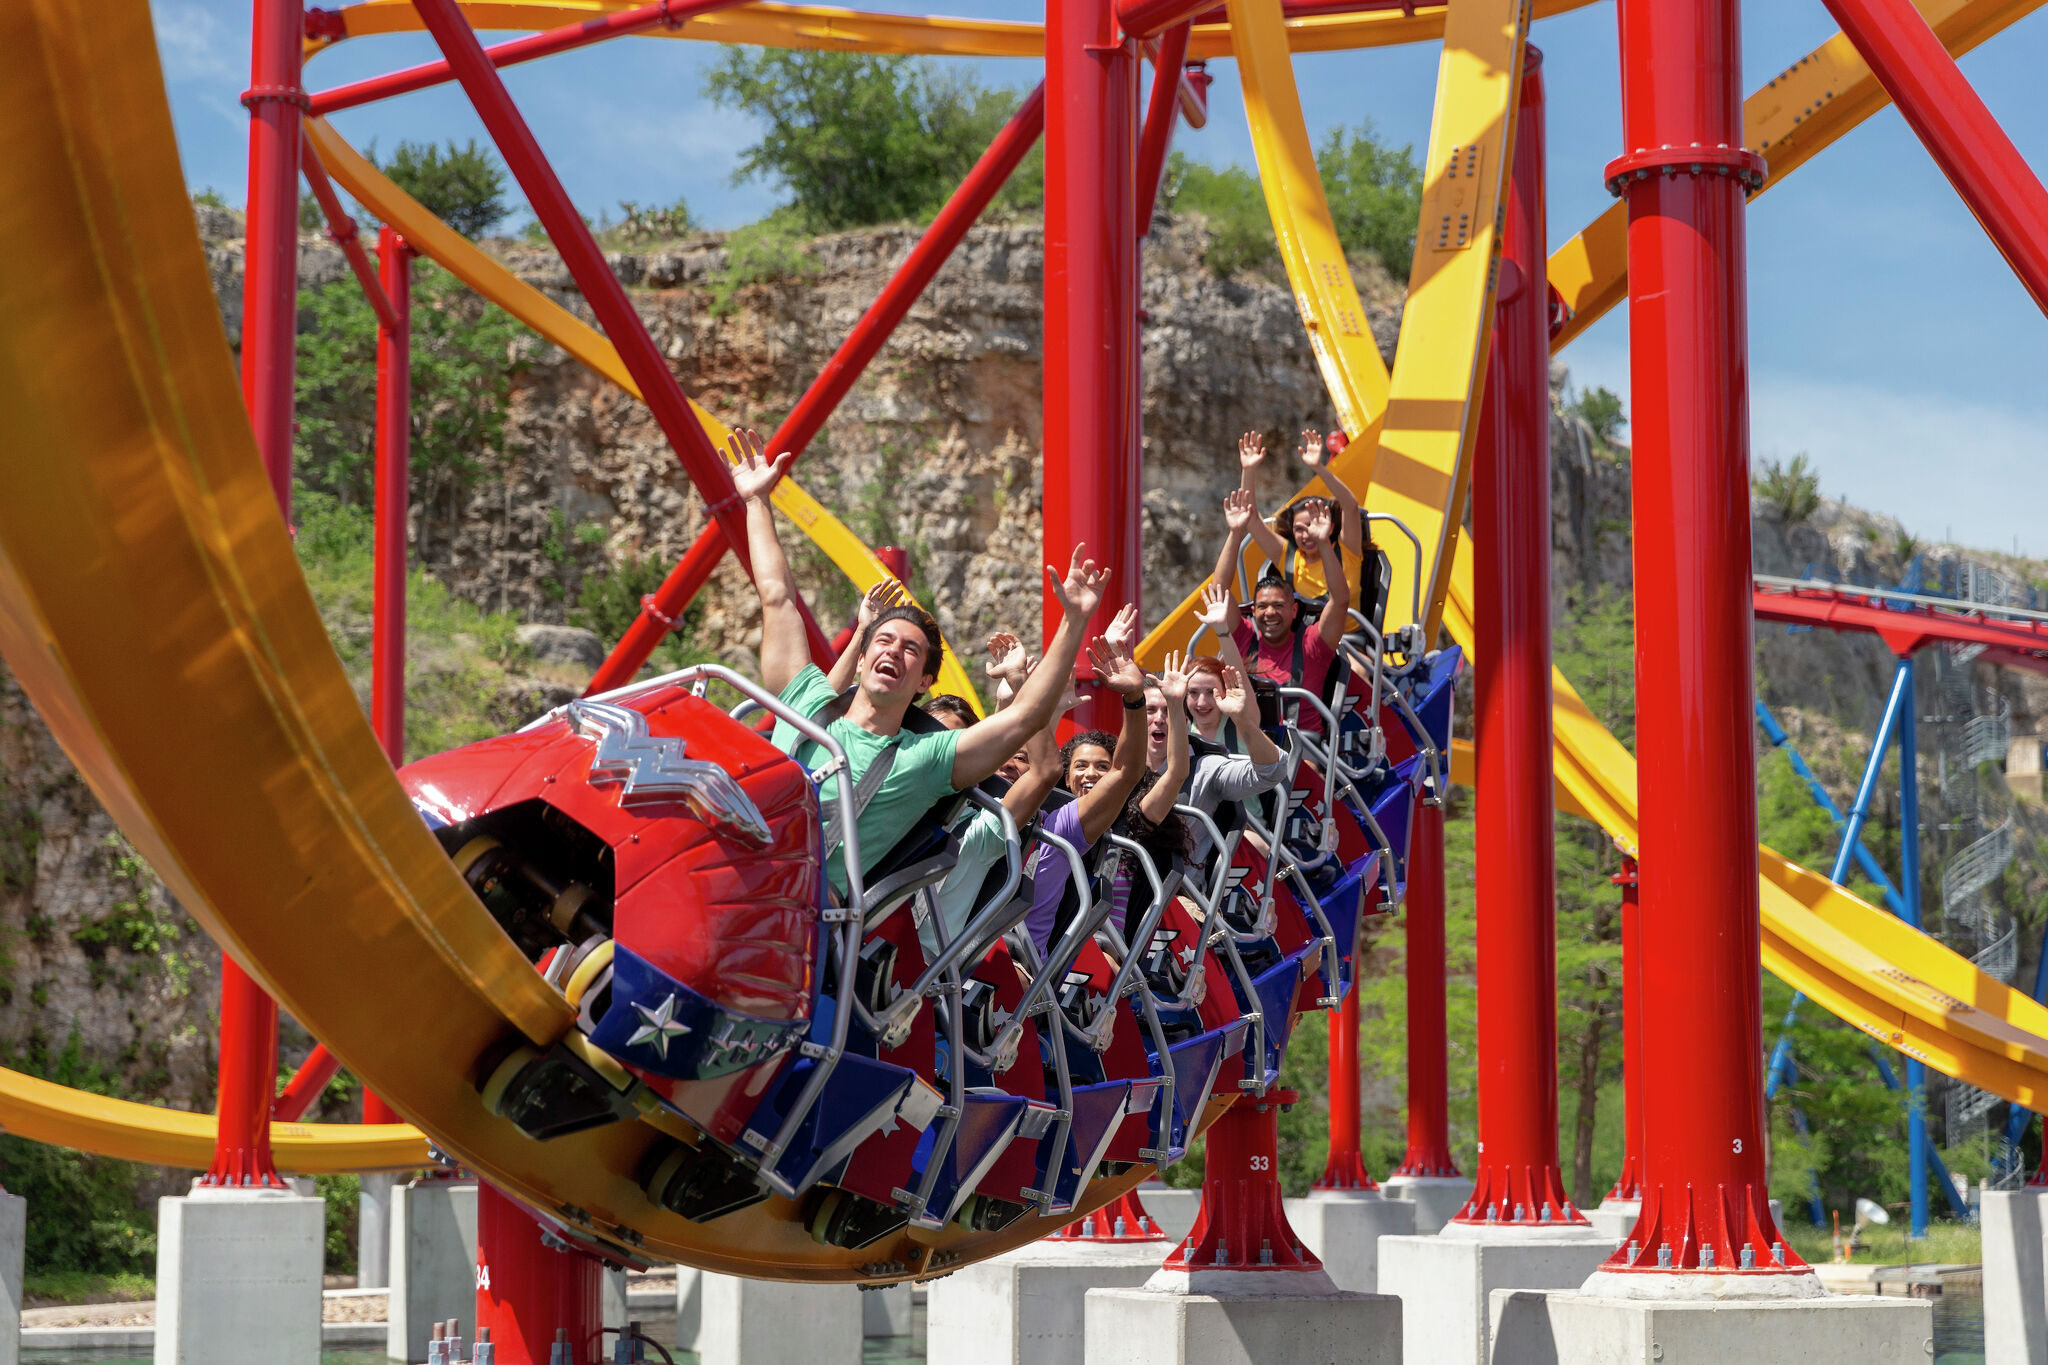 Experience epic thrills at Six Flags Fiesta Texas